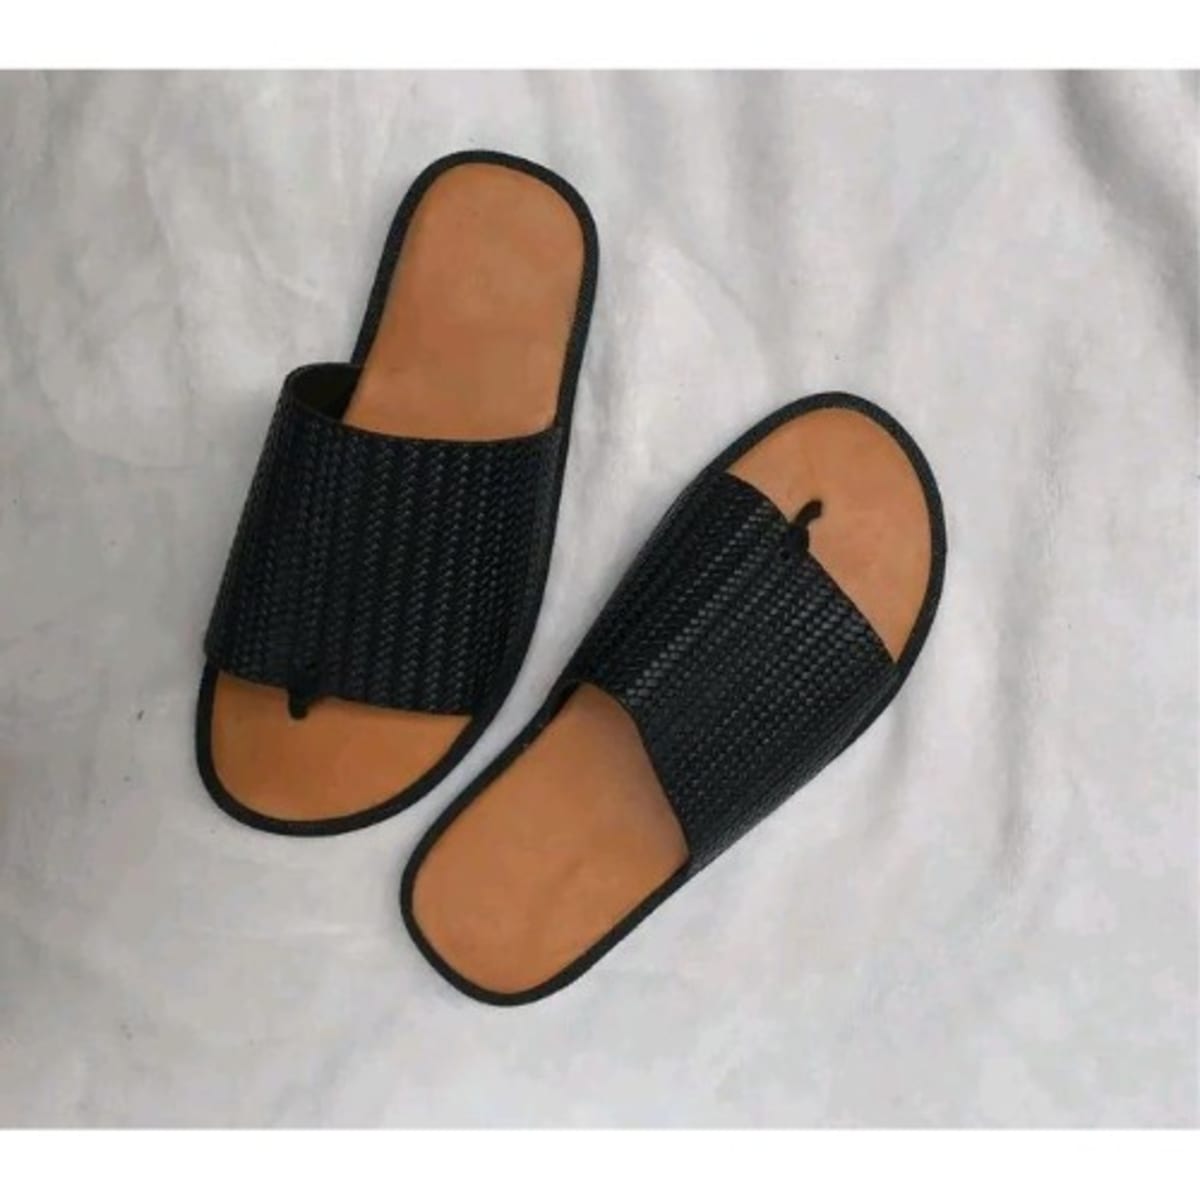 Mens Cover Pam Slippers With Toe - Black/brown